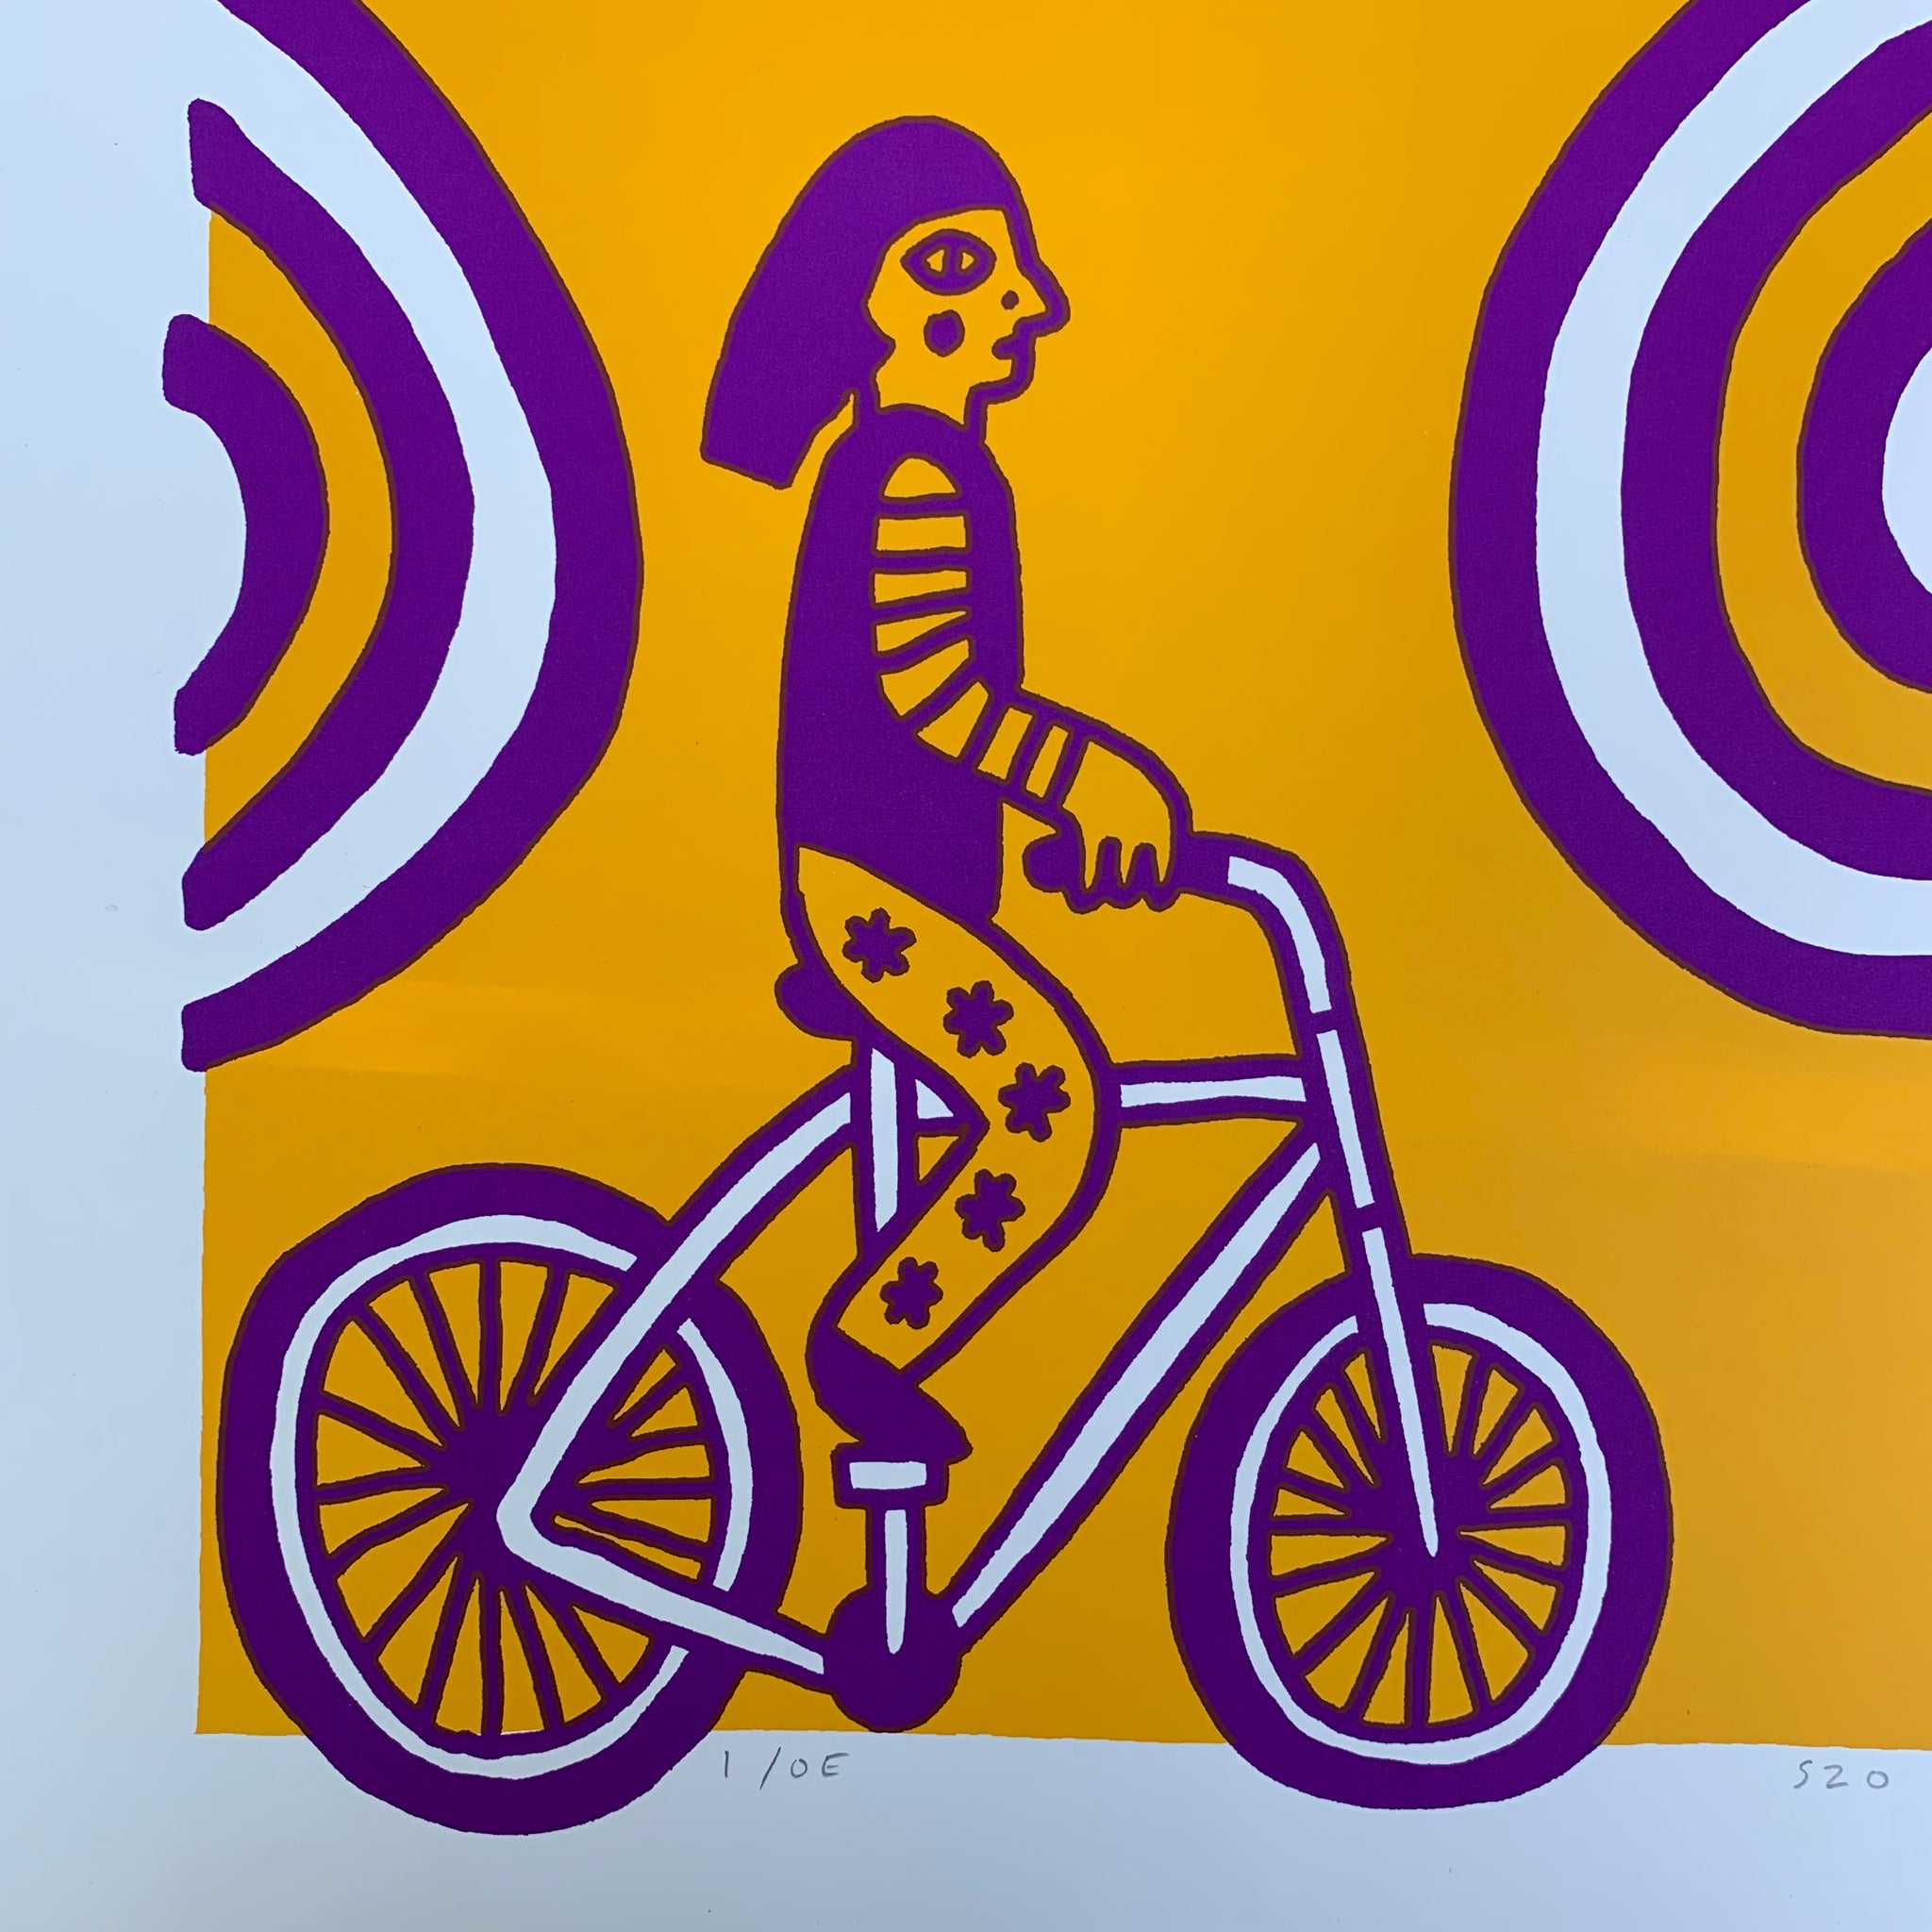 Screen Printed Poster / 24in x 36in / S21